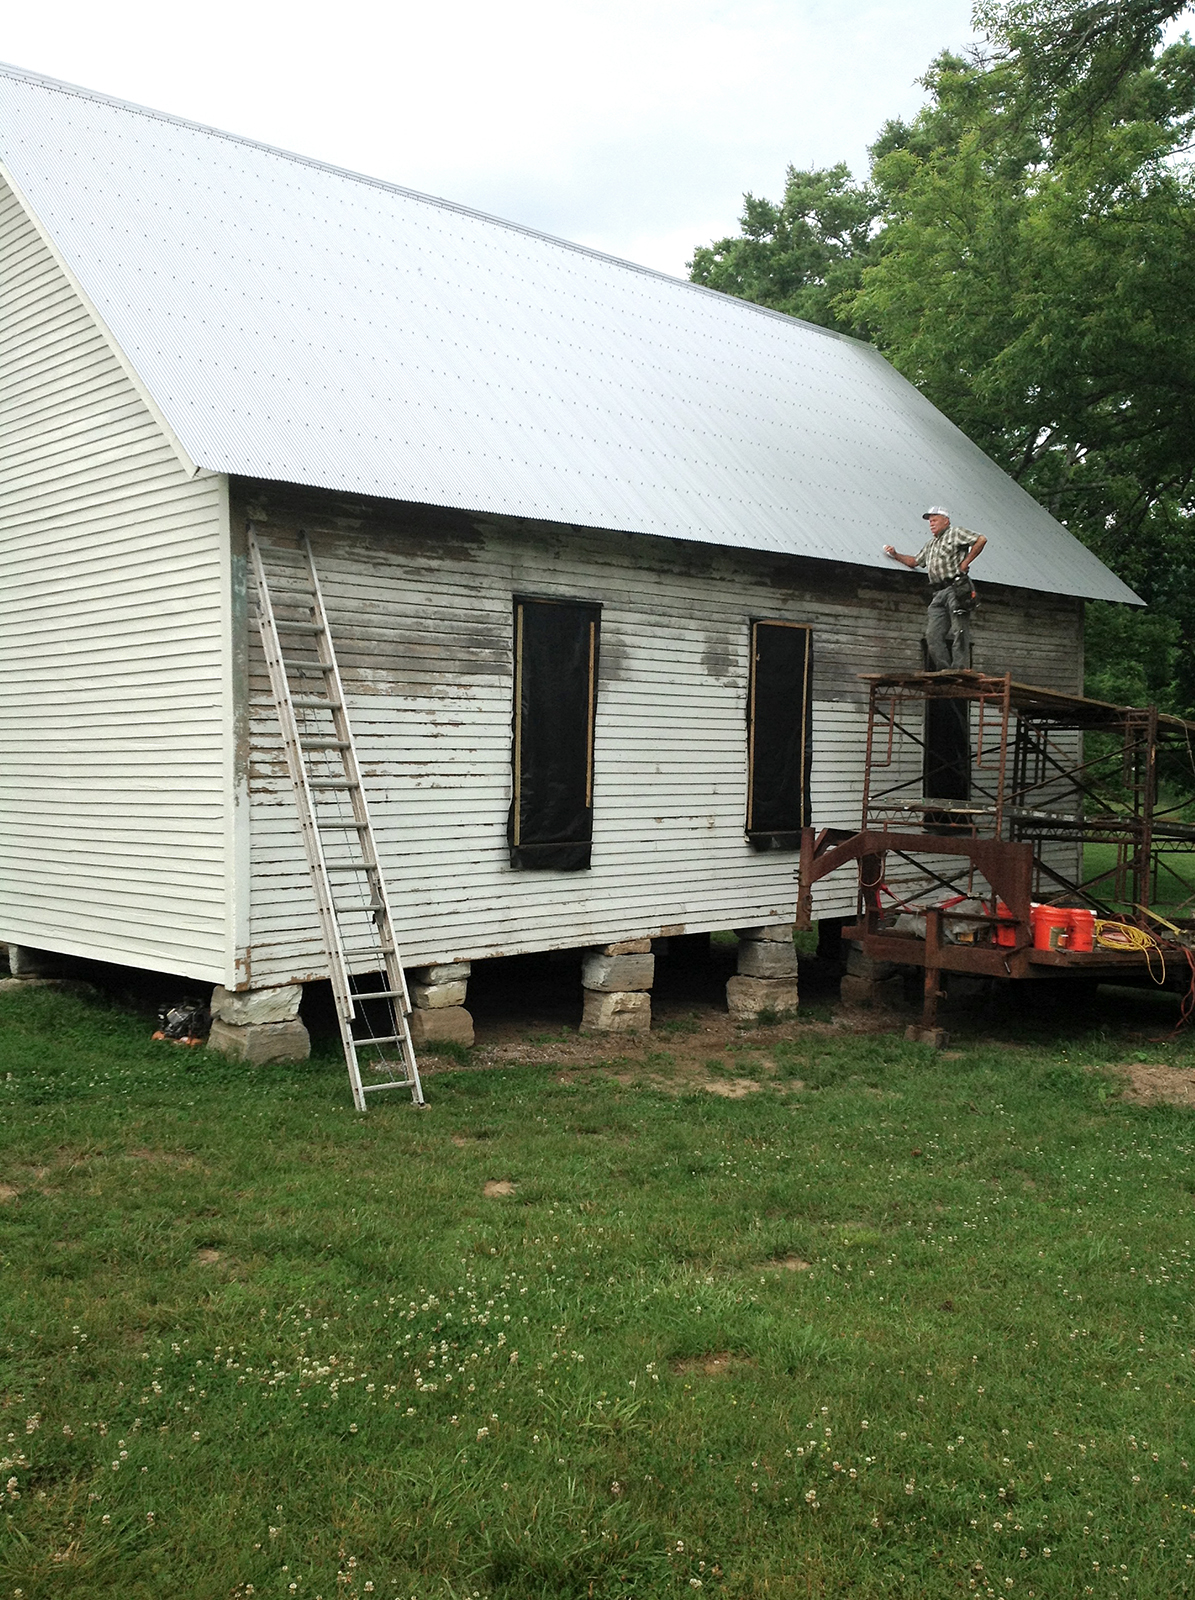 Payton Hewitt on scaffolding leaning against completed roof of one-room schoolhouse on Foxfire Farm in Lynnville, TN